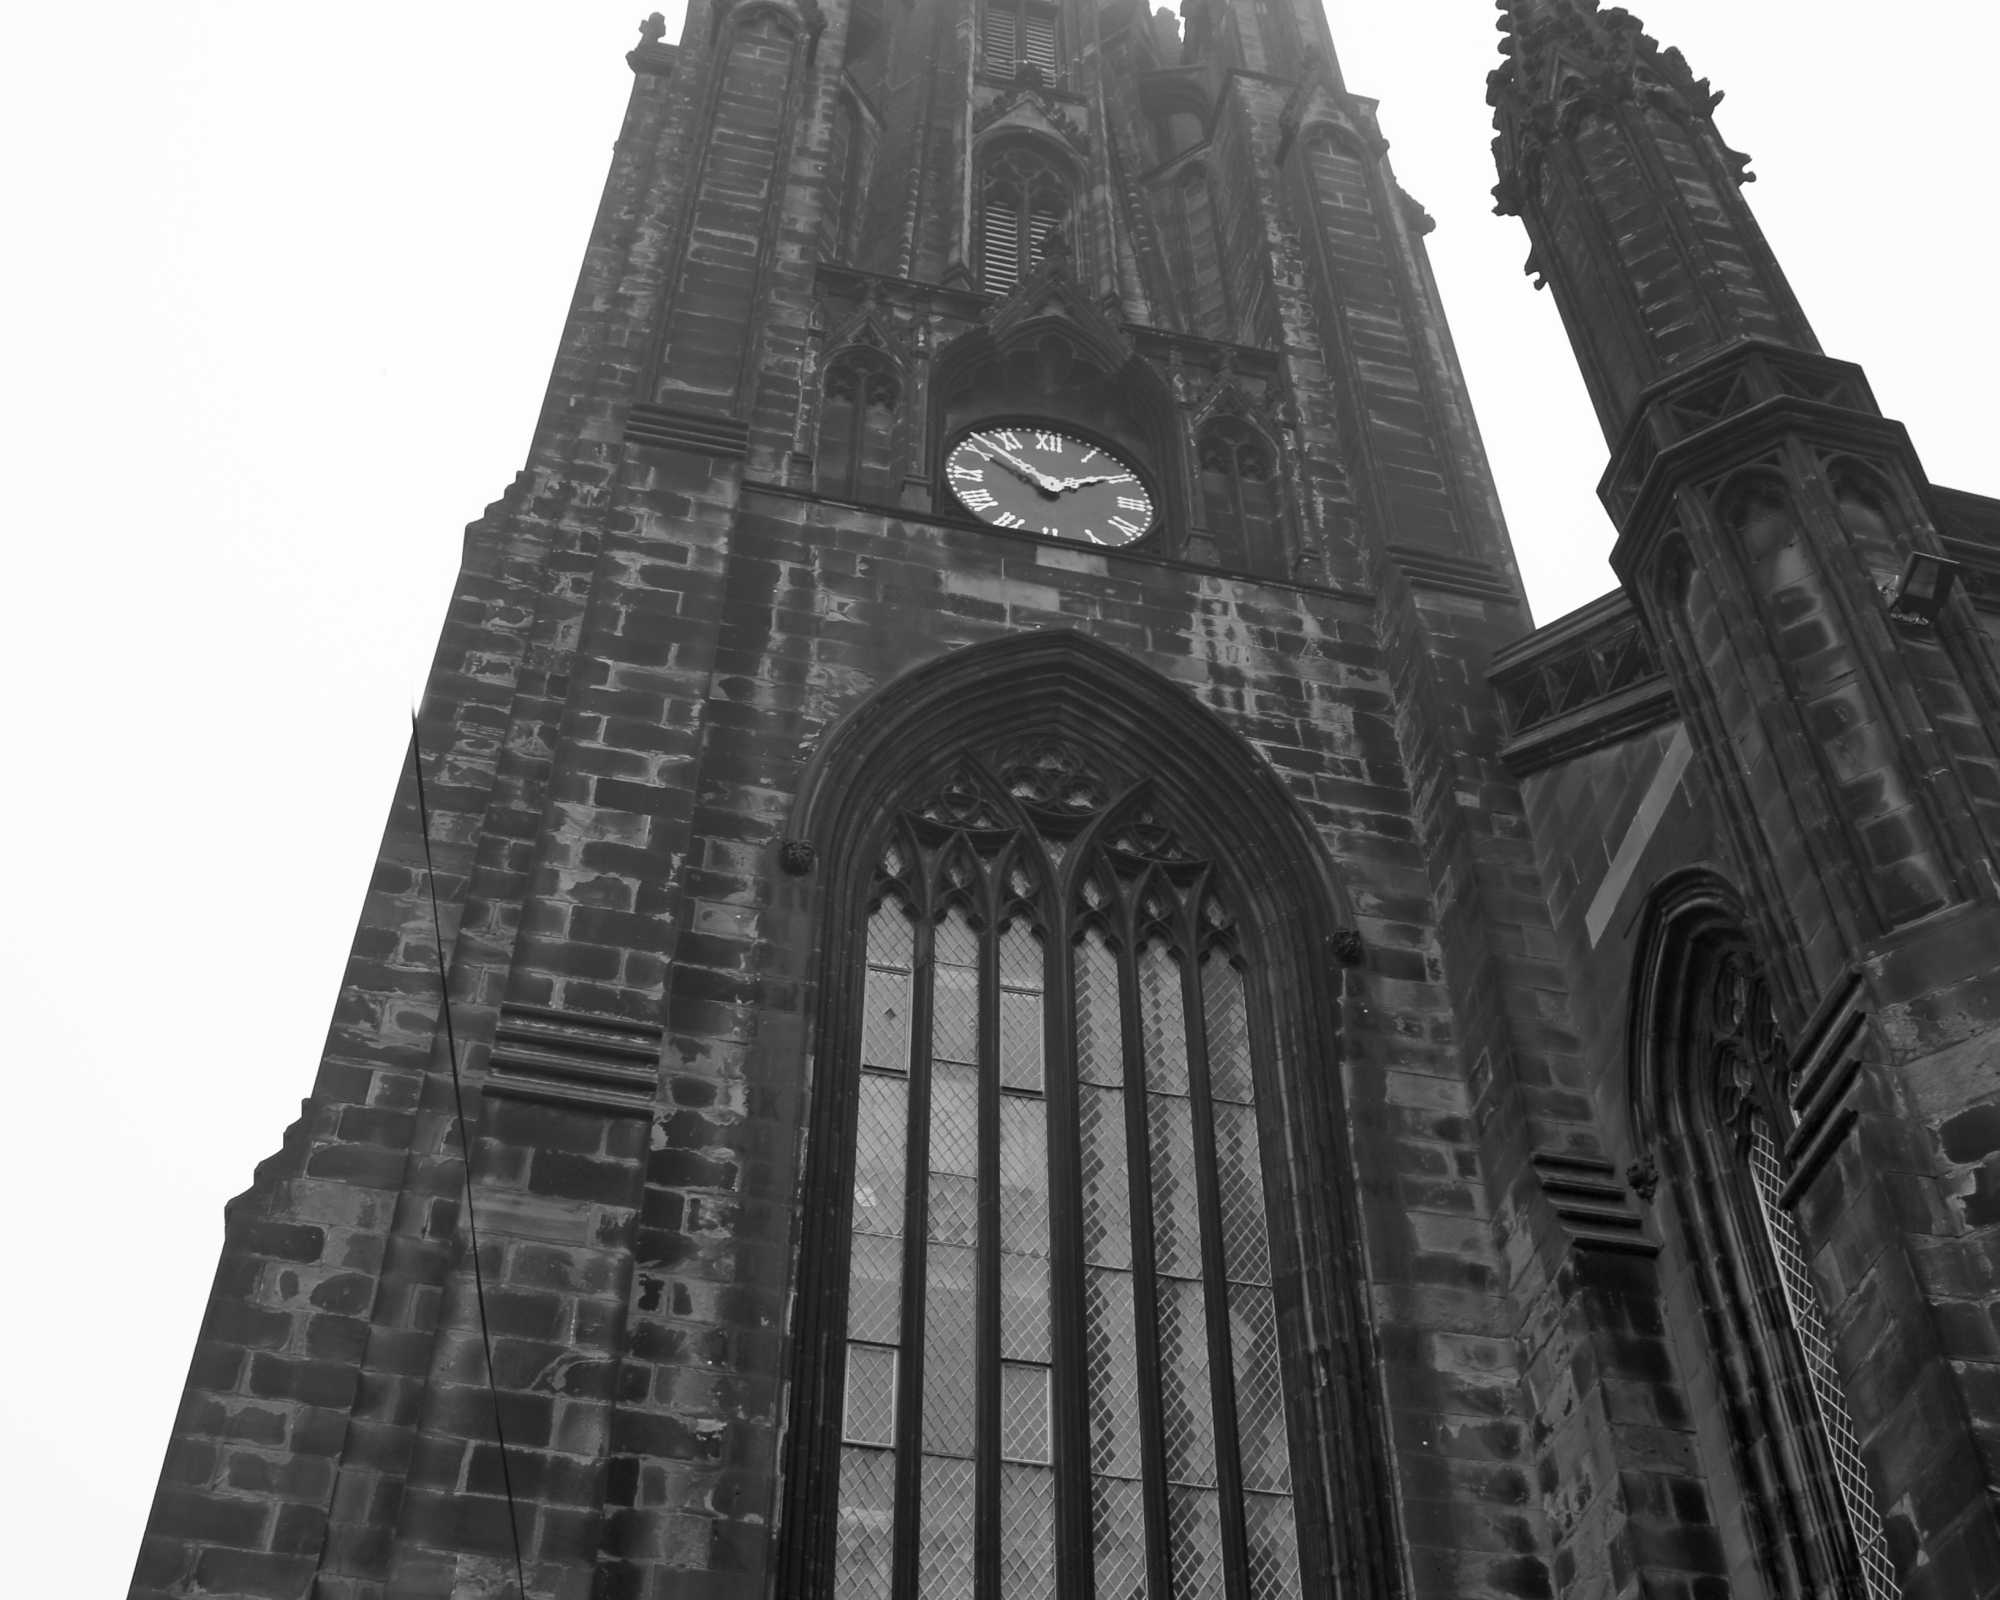 Looking Up at the a Church Tower